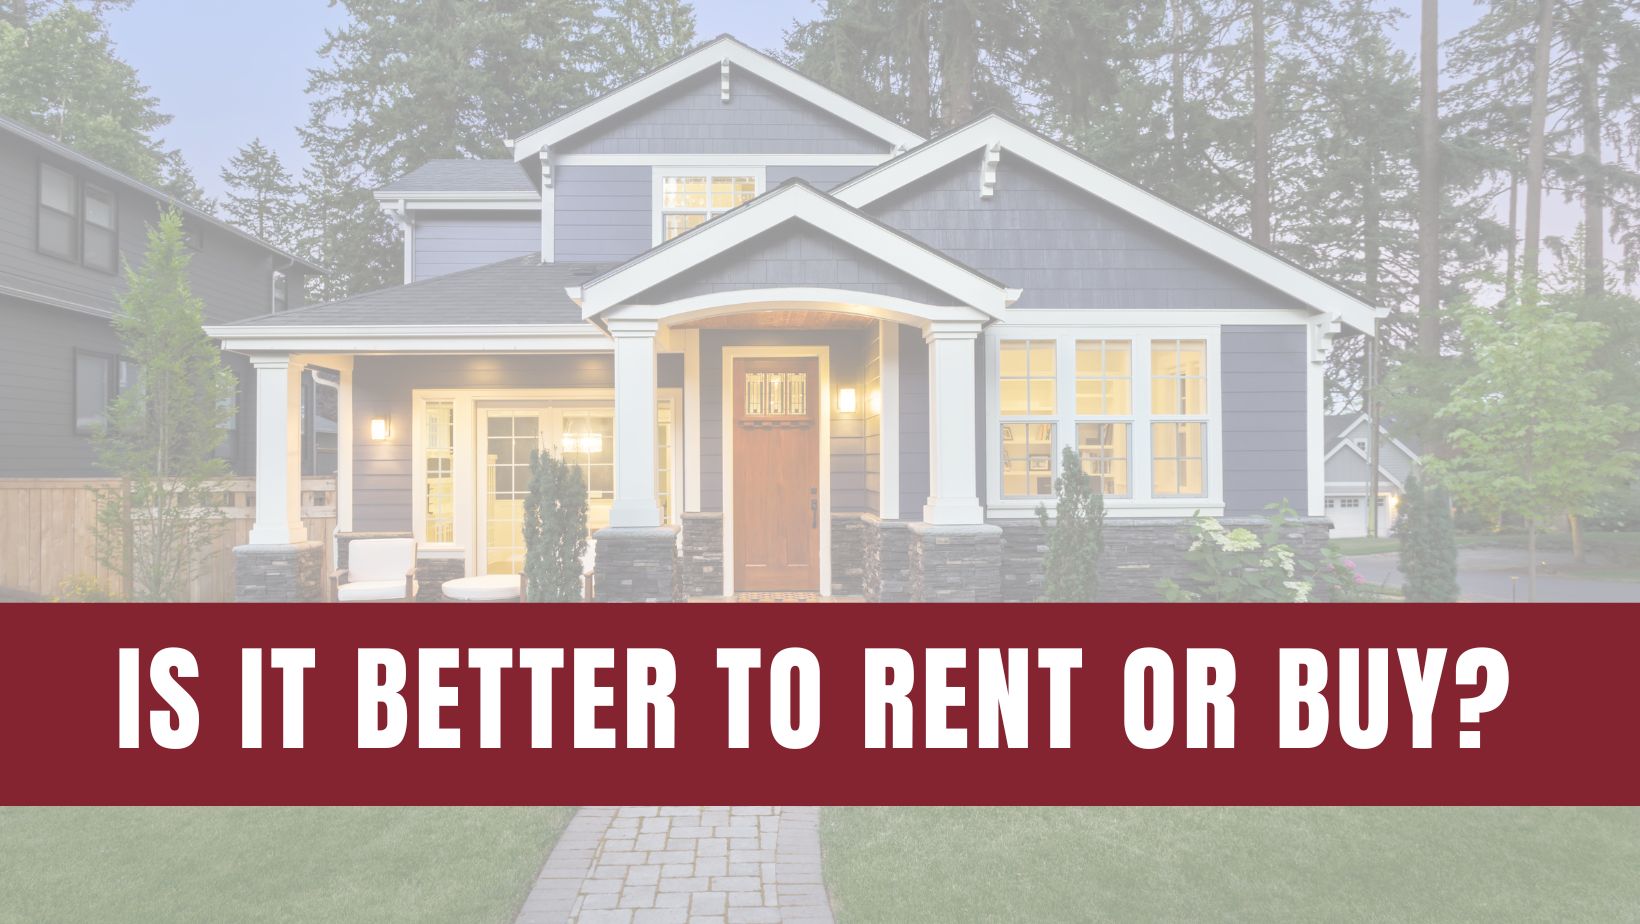 Is It Better To Rent Than Buy a Home Right Now?